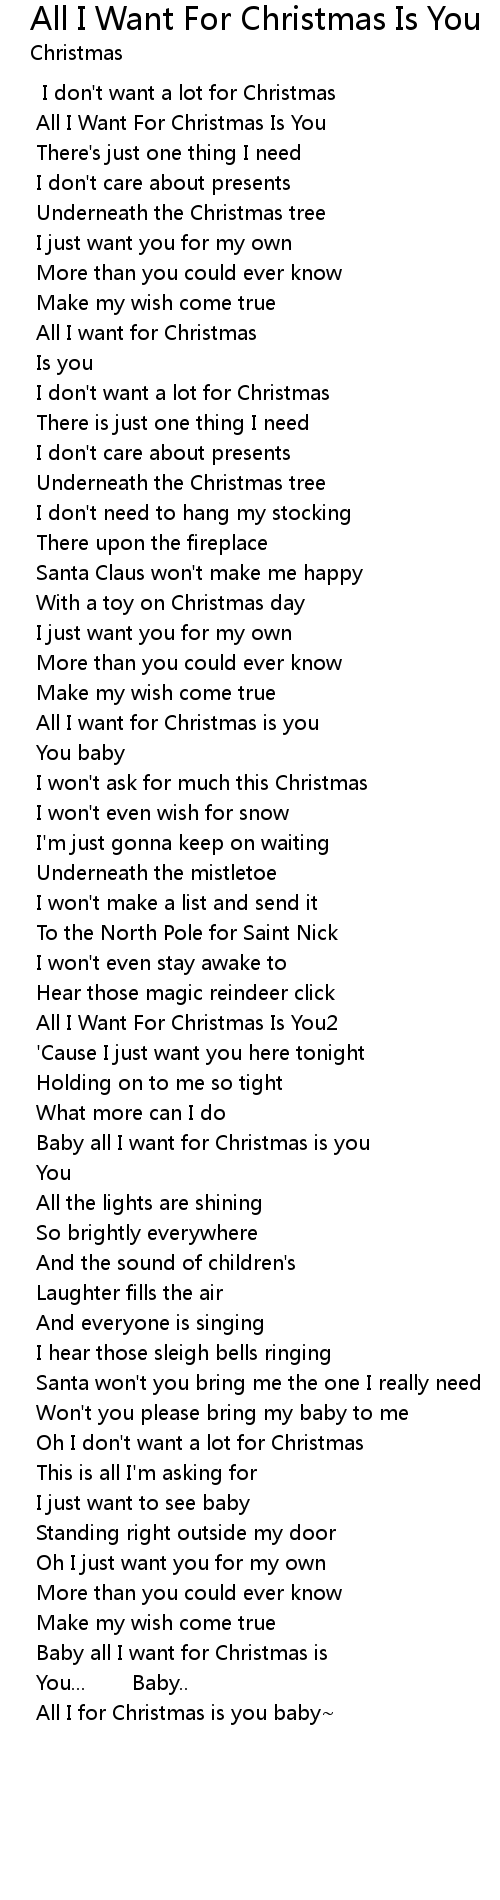 cause all i want for christmas is you lyrics